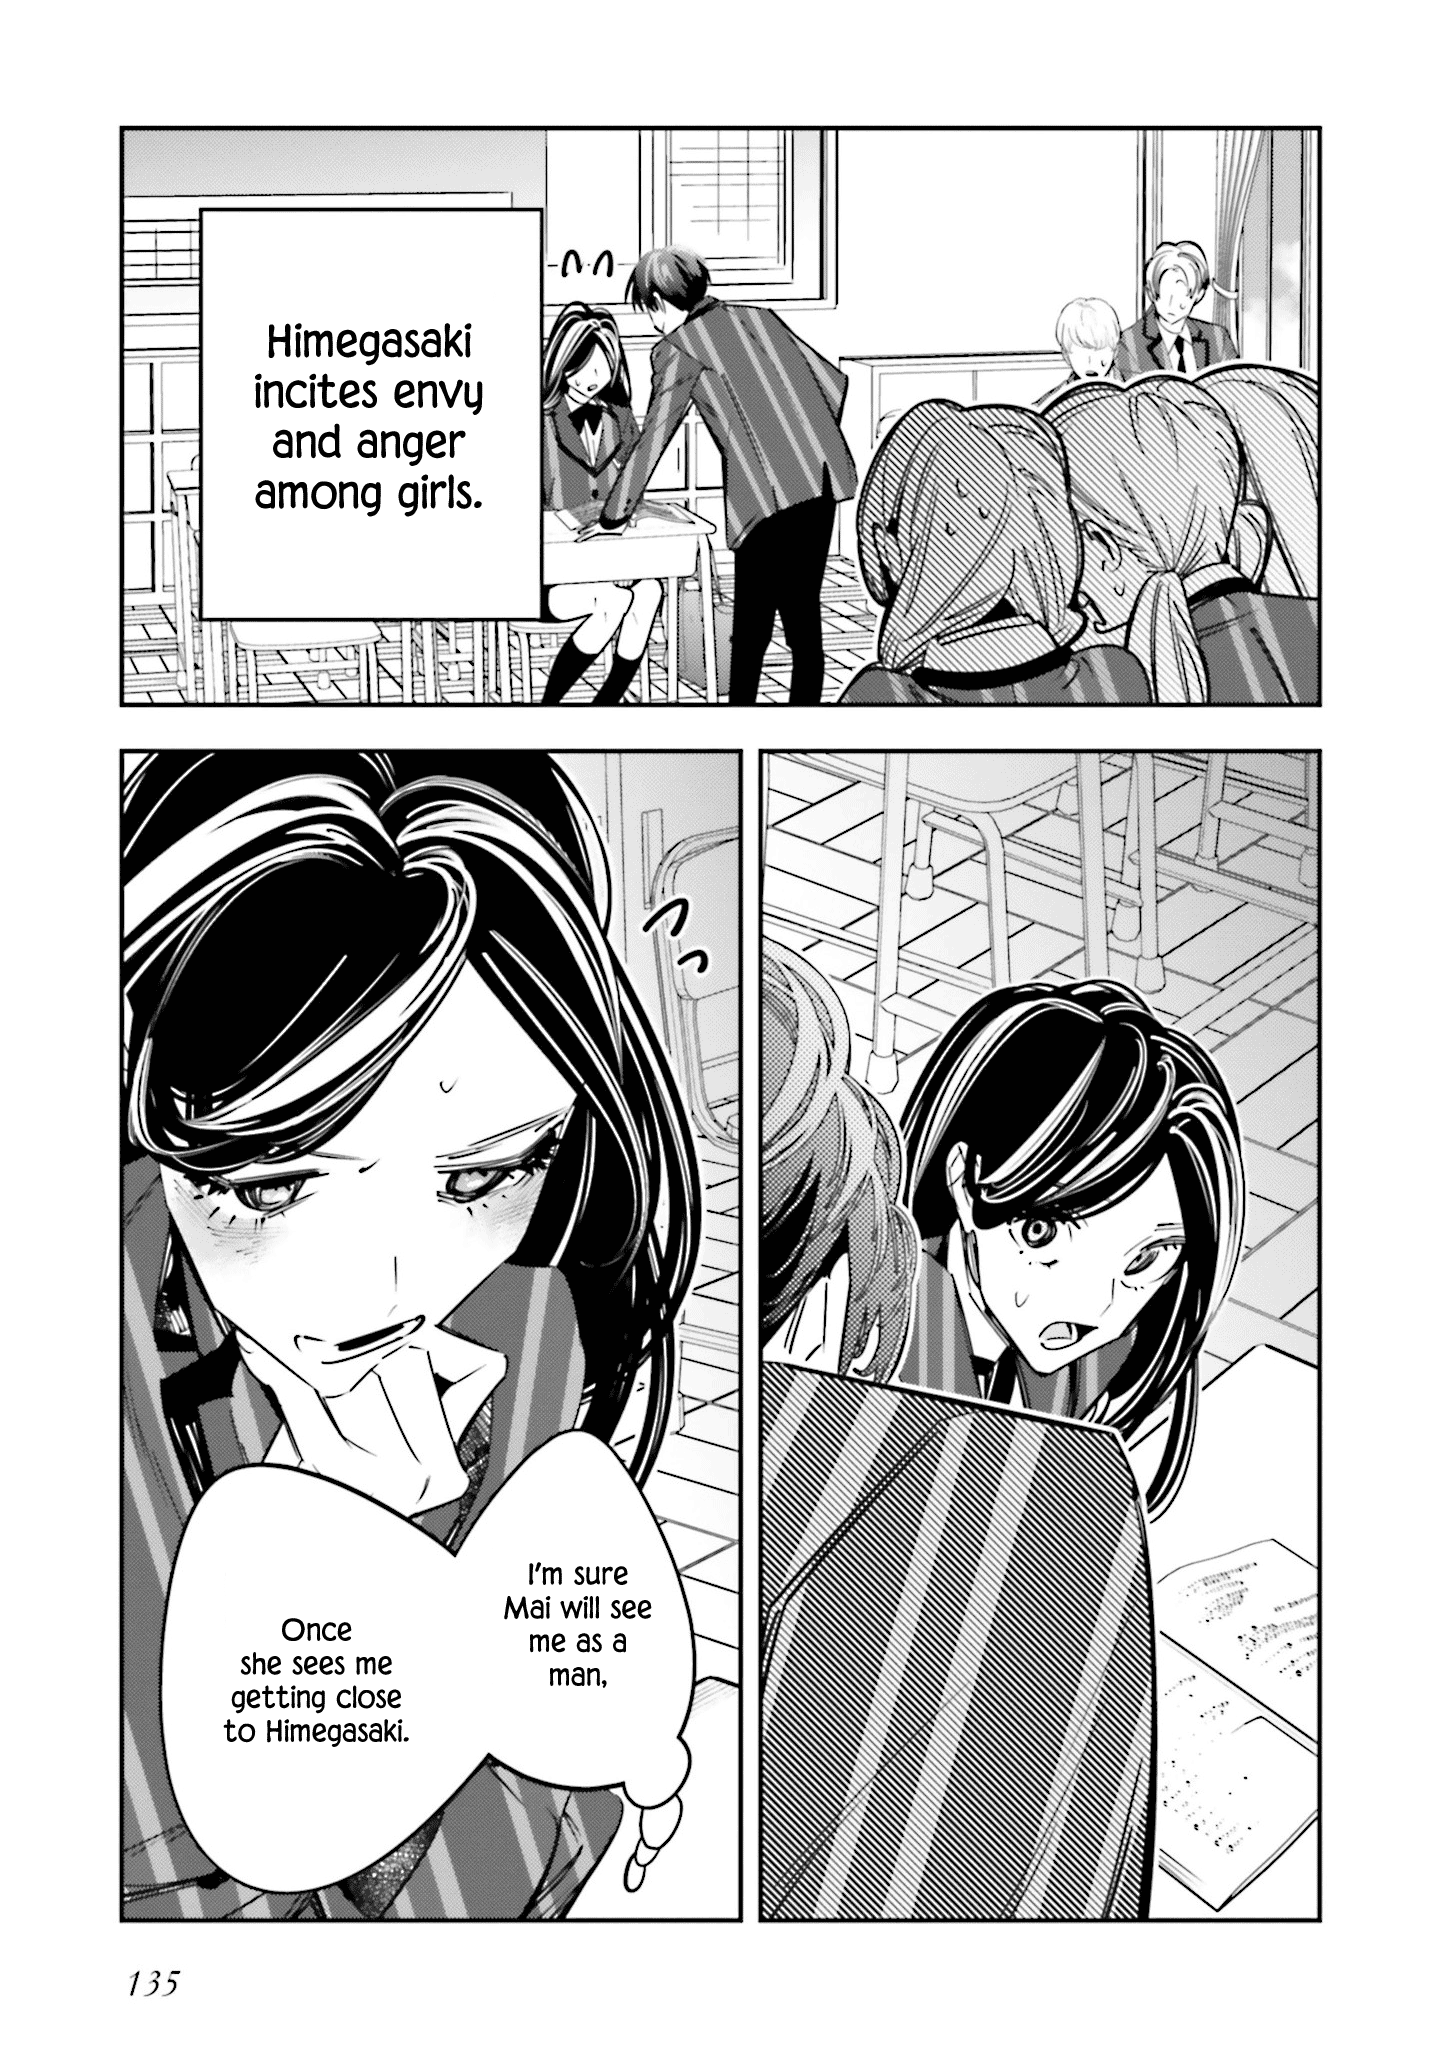 I Reincarnated As The Little Sister Of A Death Game Manga's Murder Mastermind And Failed Chapter 9 #17